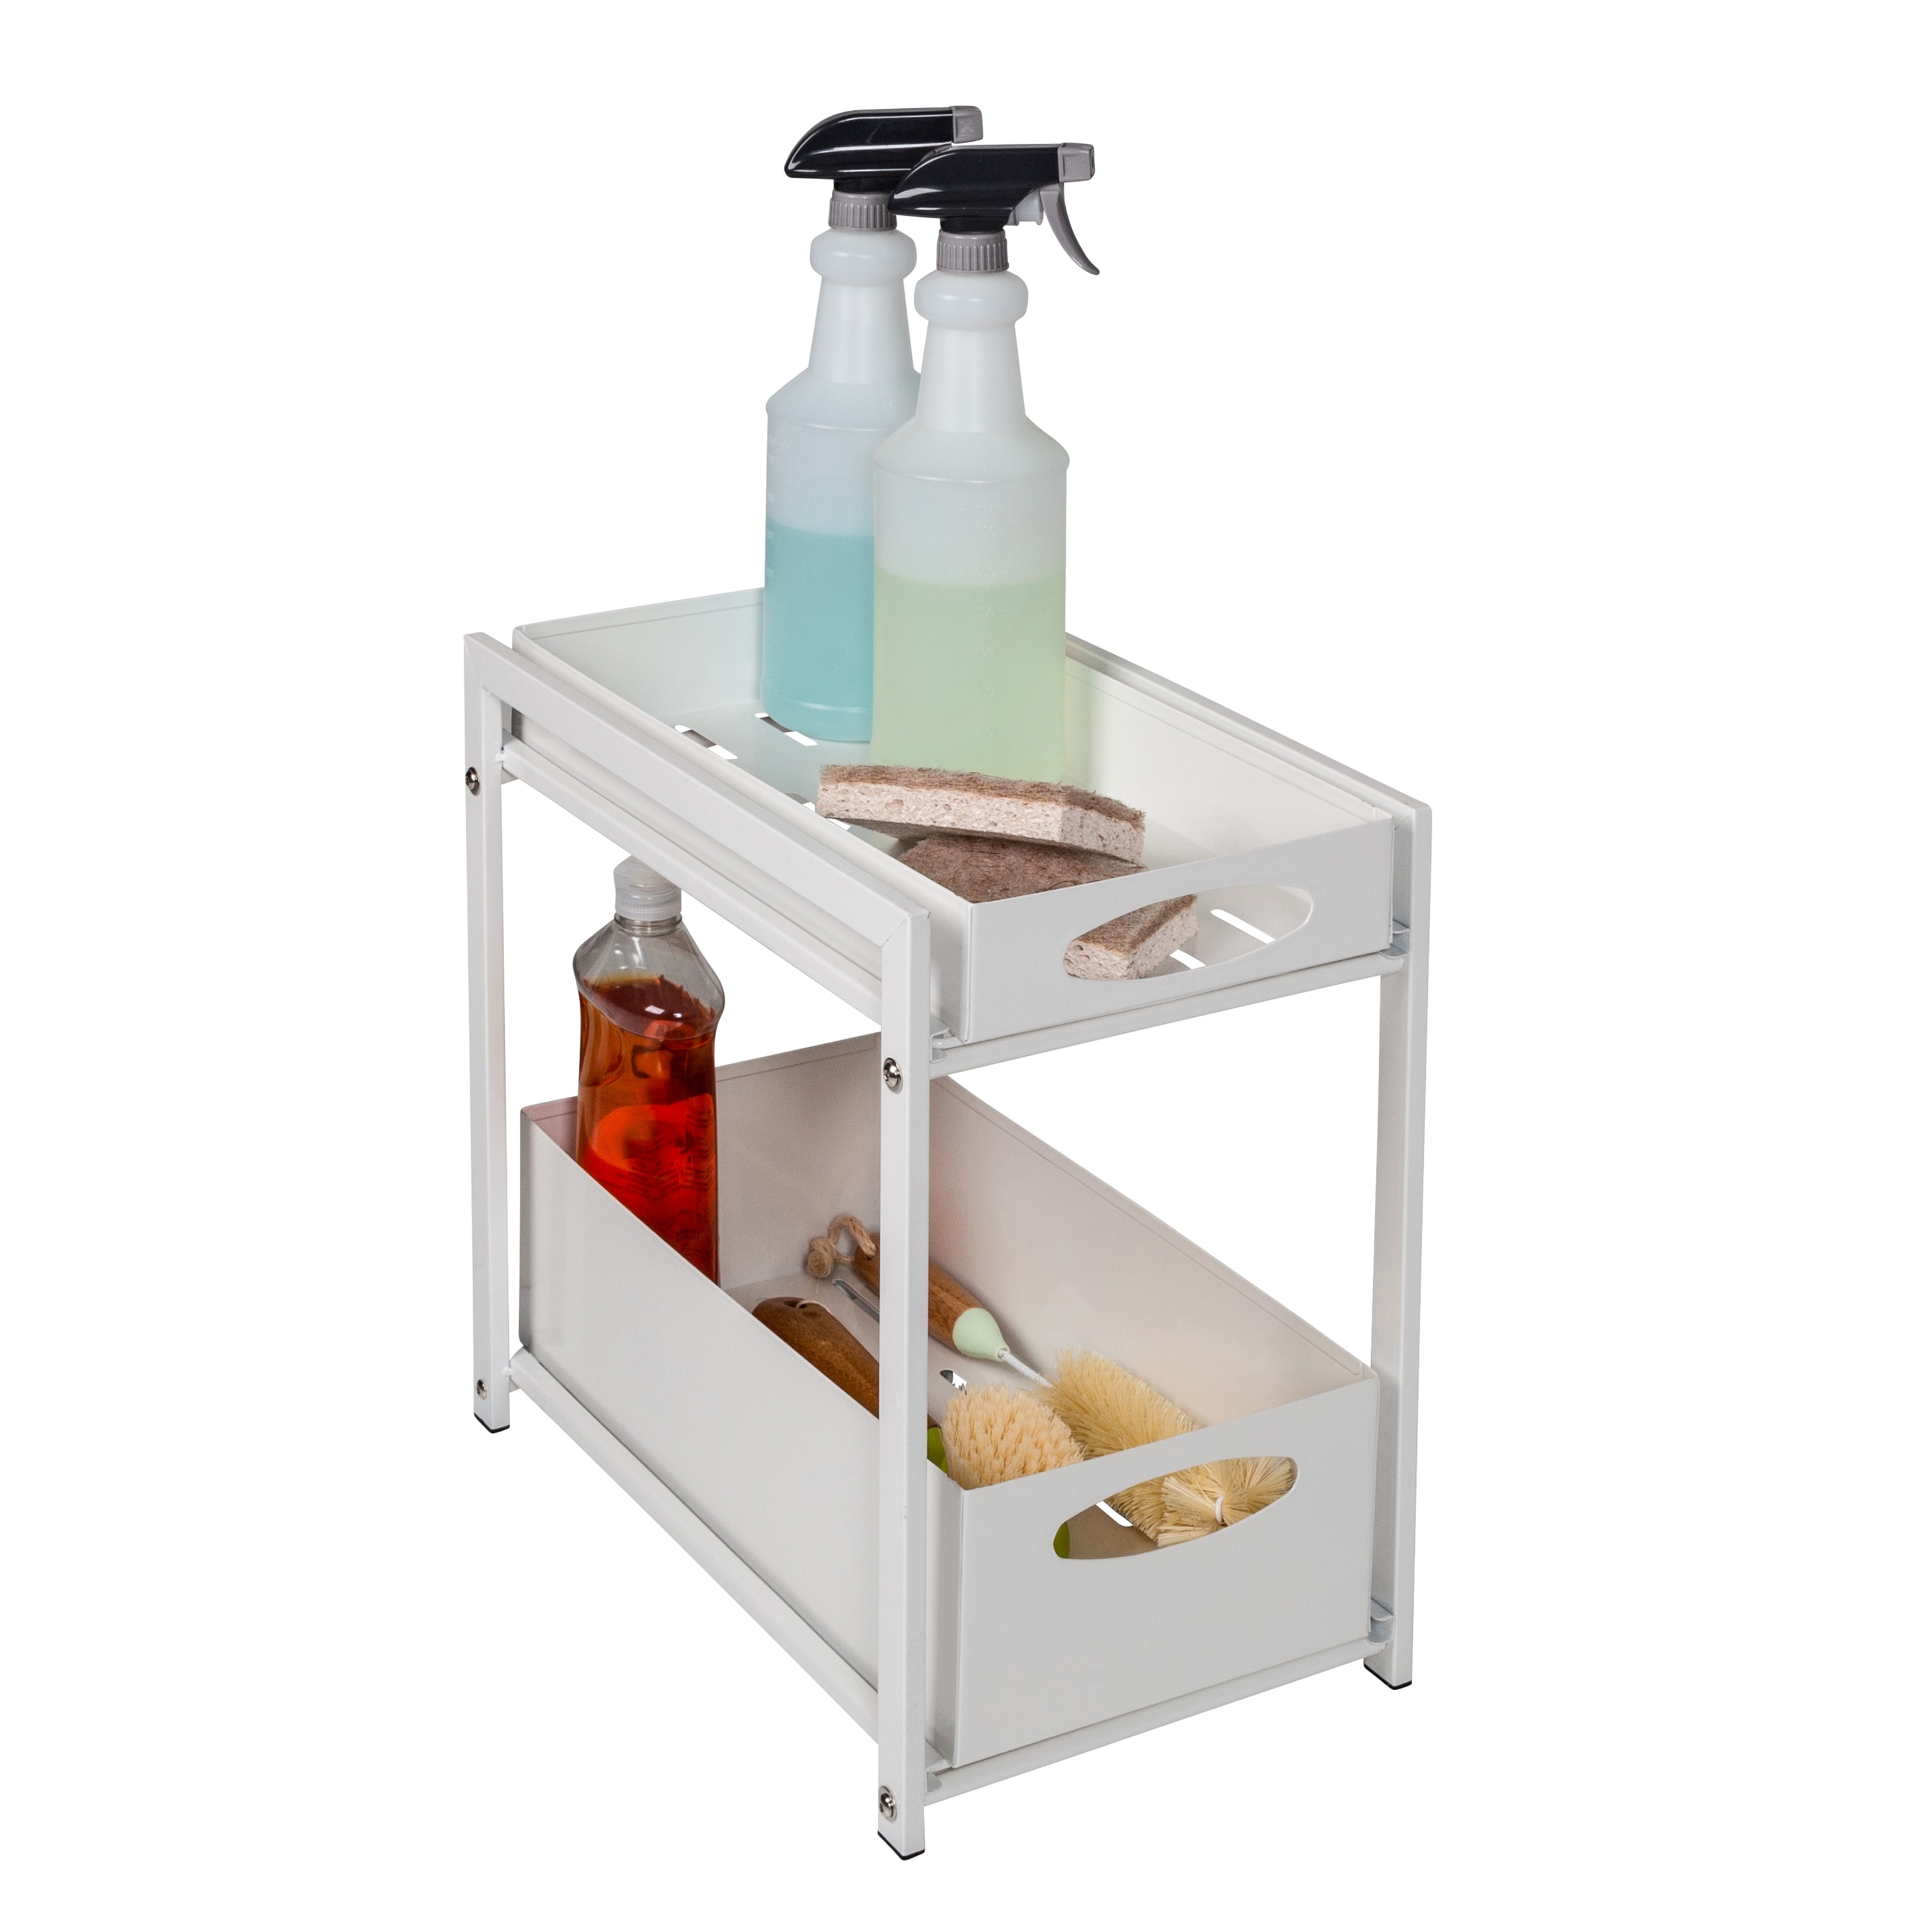 https://ak1.ostkcdn.com/images/products/is/images/direct/ab1d96e0f5f6da806fe43a54360433c608f8989f/Metal-Kitchen-Cabinet-Organizer-with-Drawers%2C-White.jpg